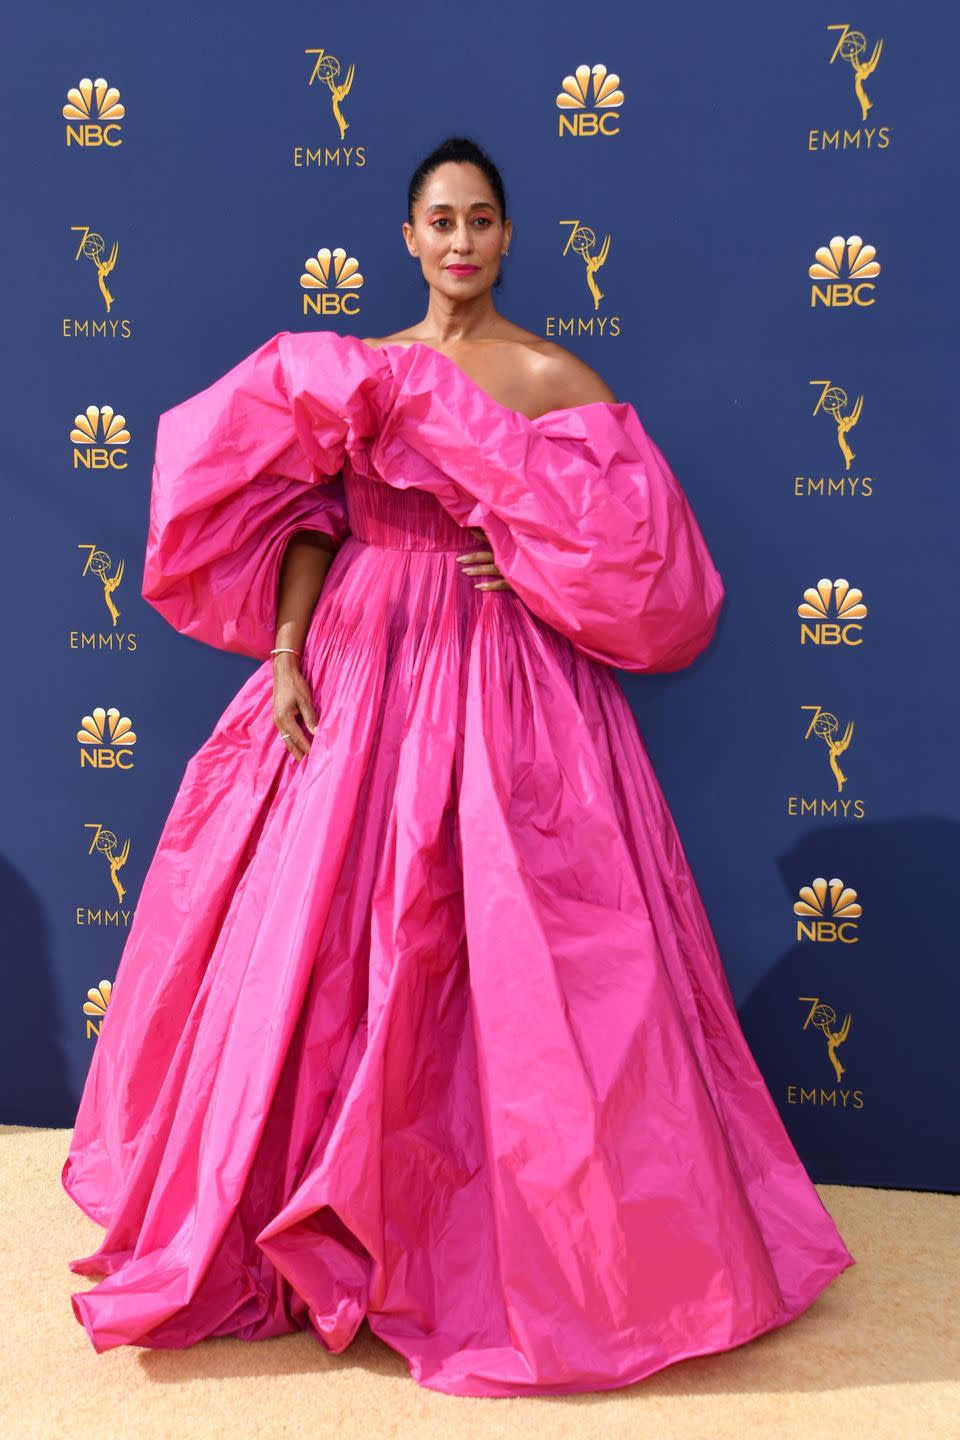 lead actress in a comedy series nominee tracee ellis ross arrives for the 70th emmy awards at the microsoft theatre in los angeles, california on september 17, 2018 photo by valerie macon afp photo credit should read valerie maconafp via getty images